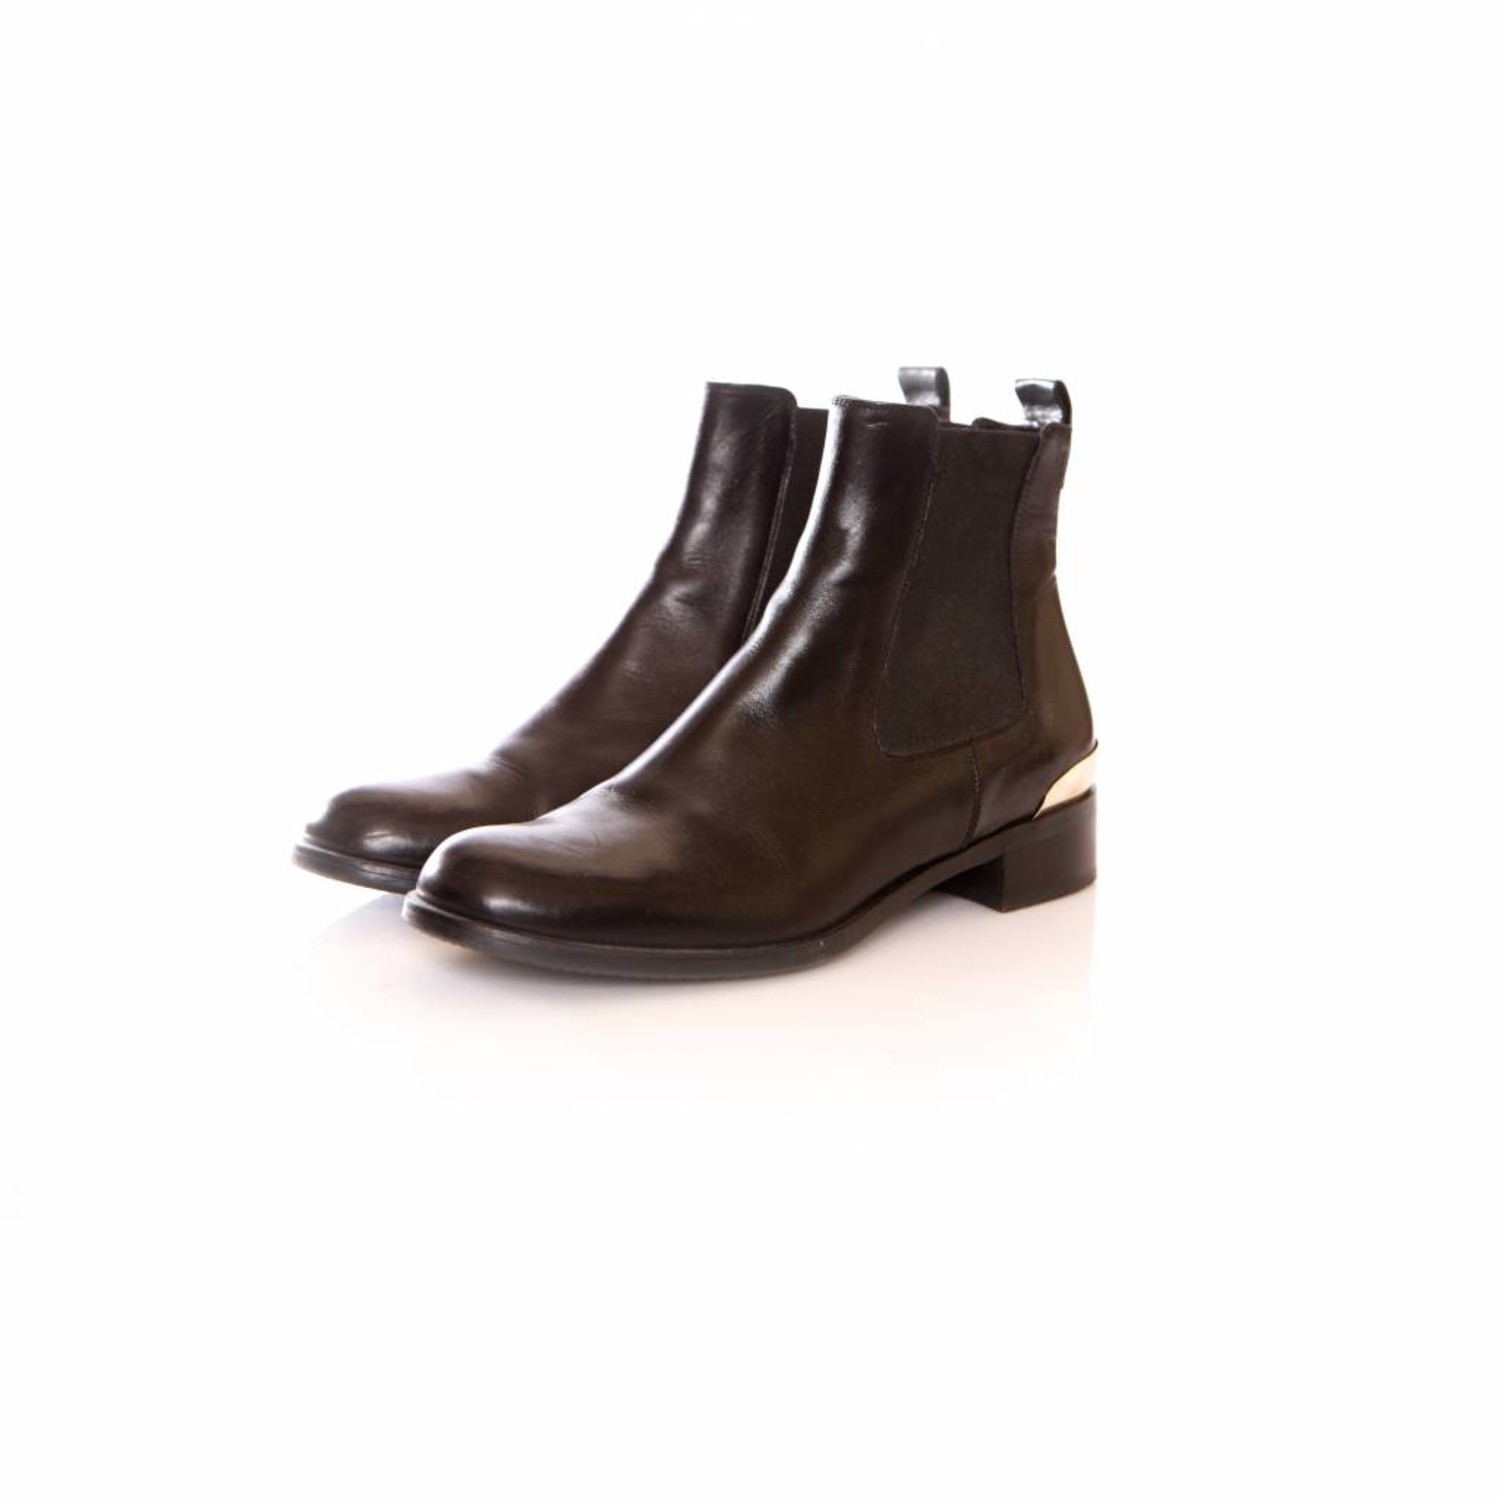 russell & bromley boots